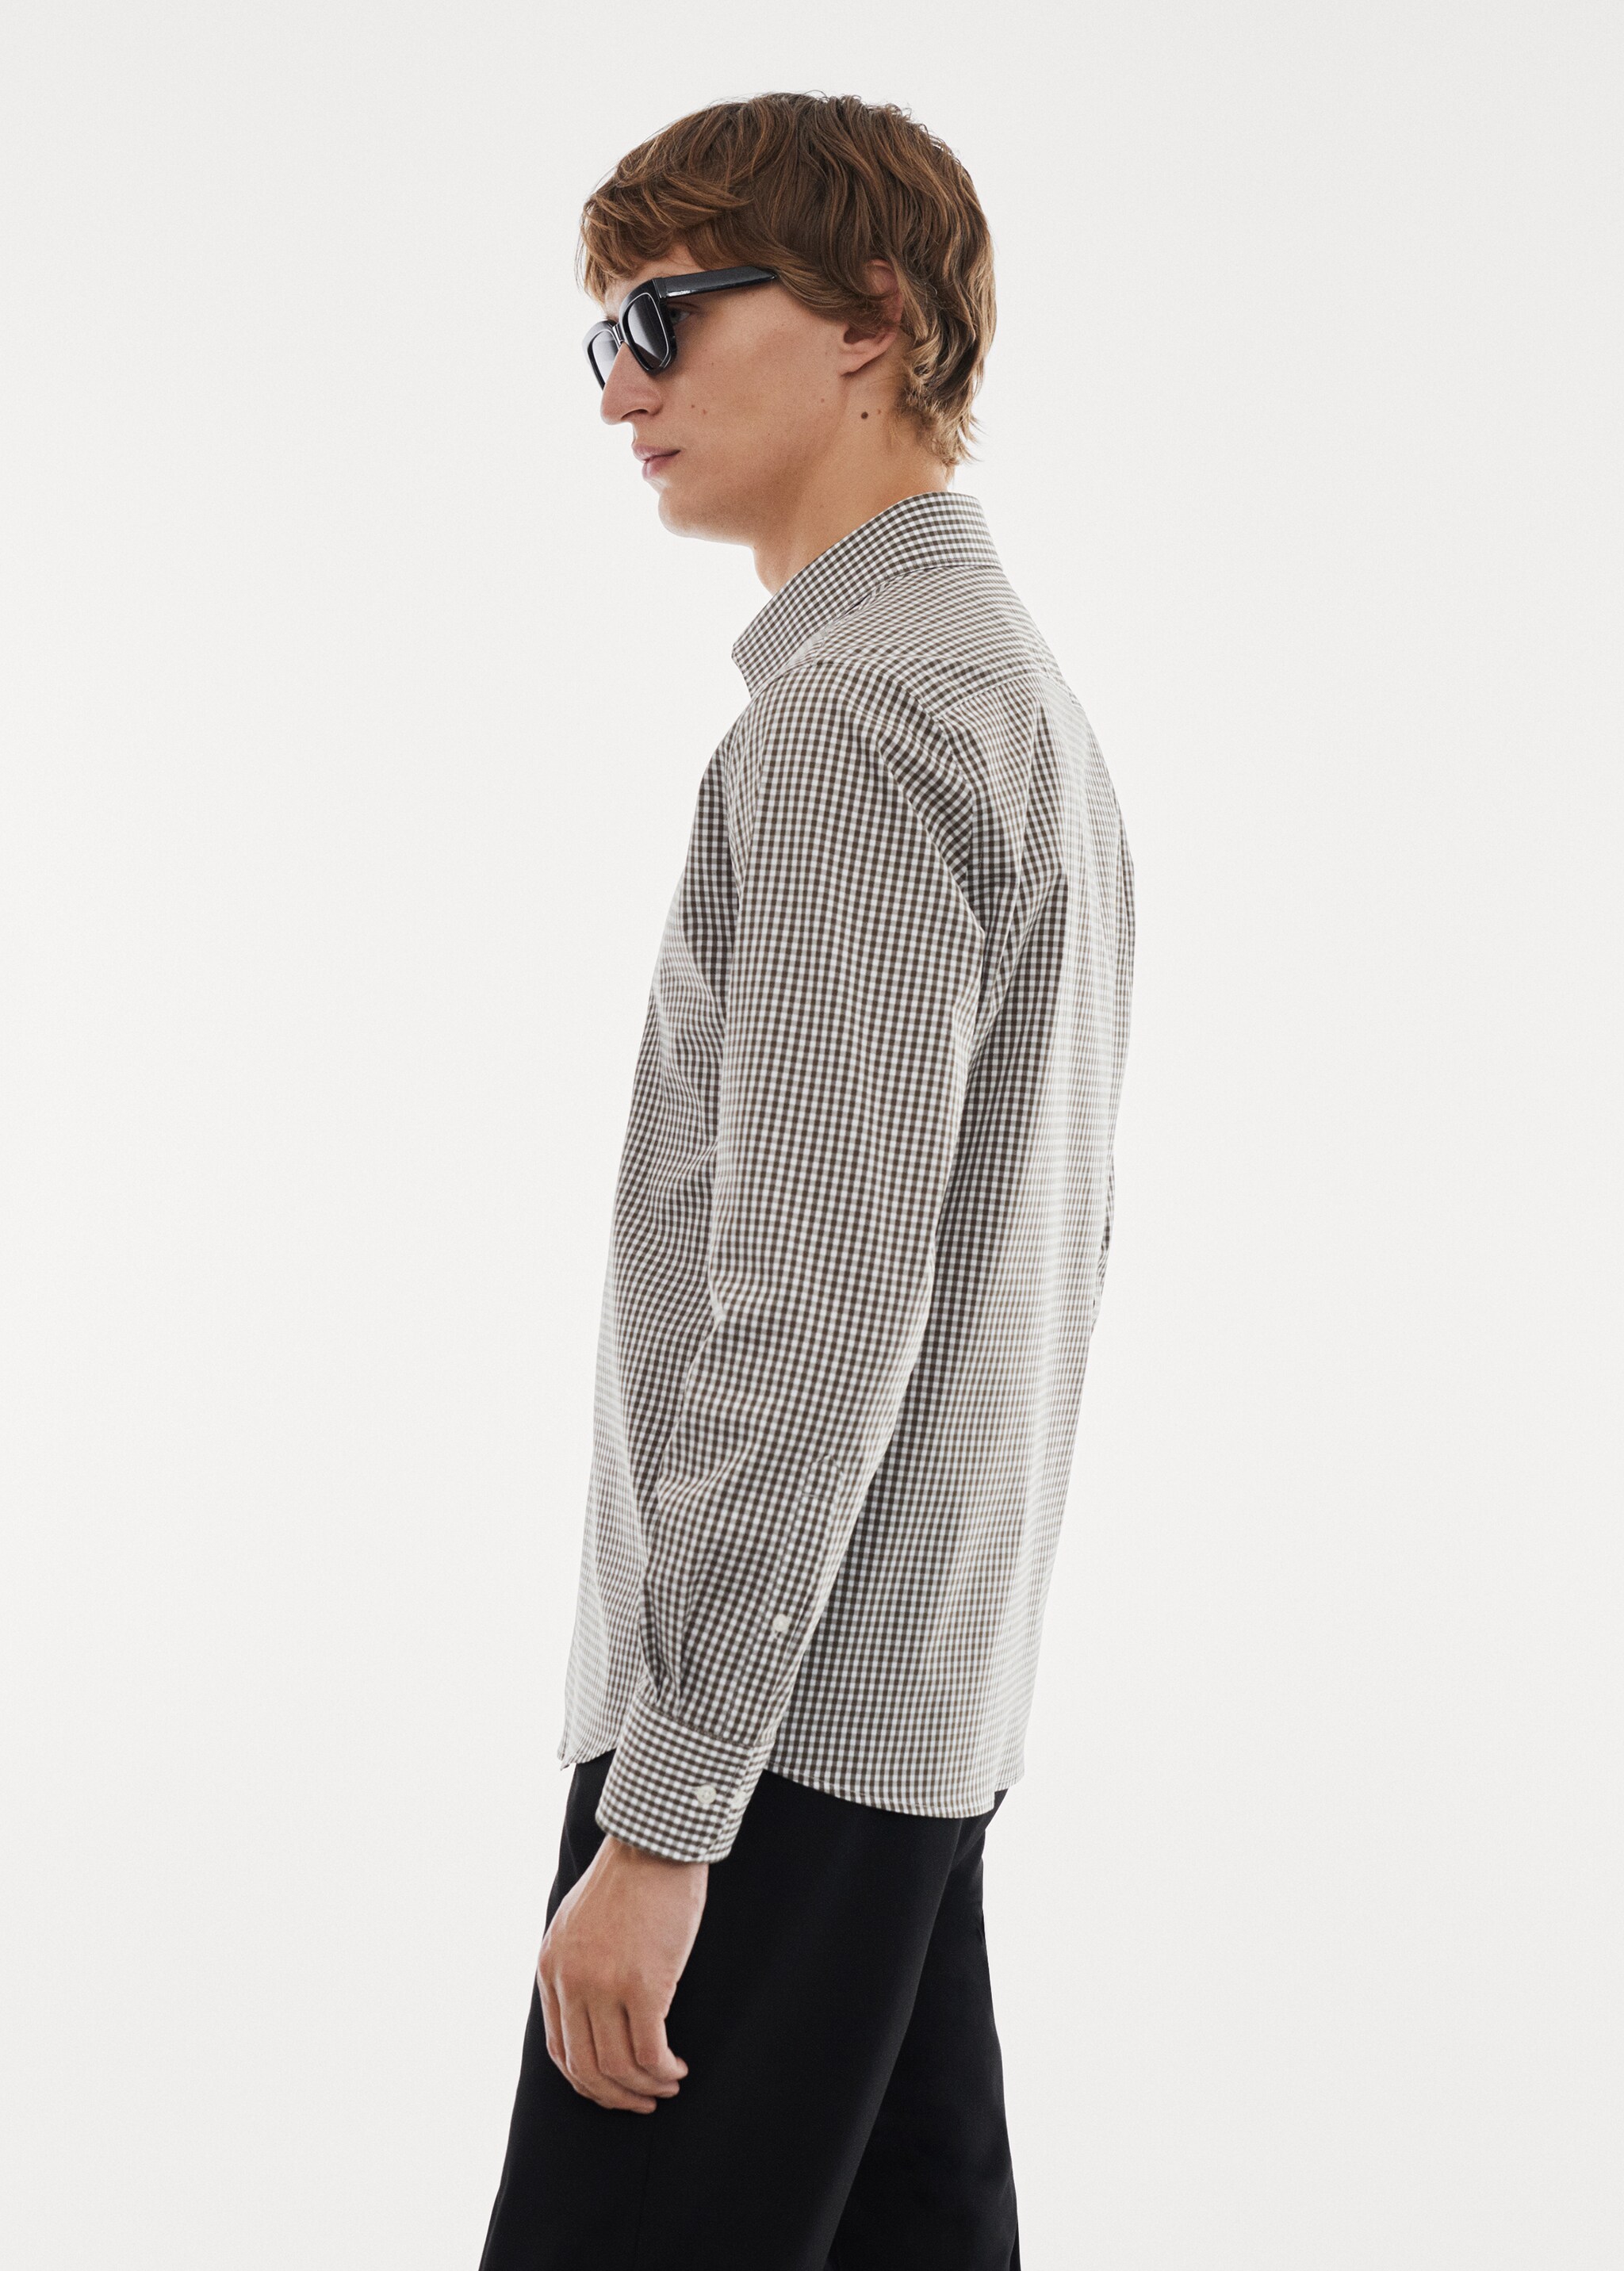 Micro-stretch fabric shirt - Details of the article 1